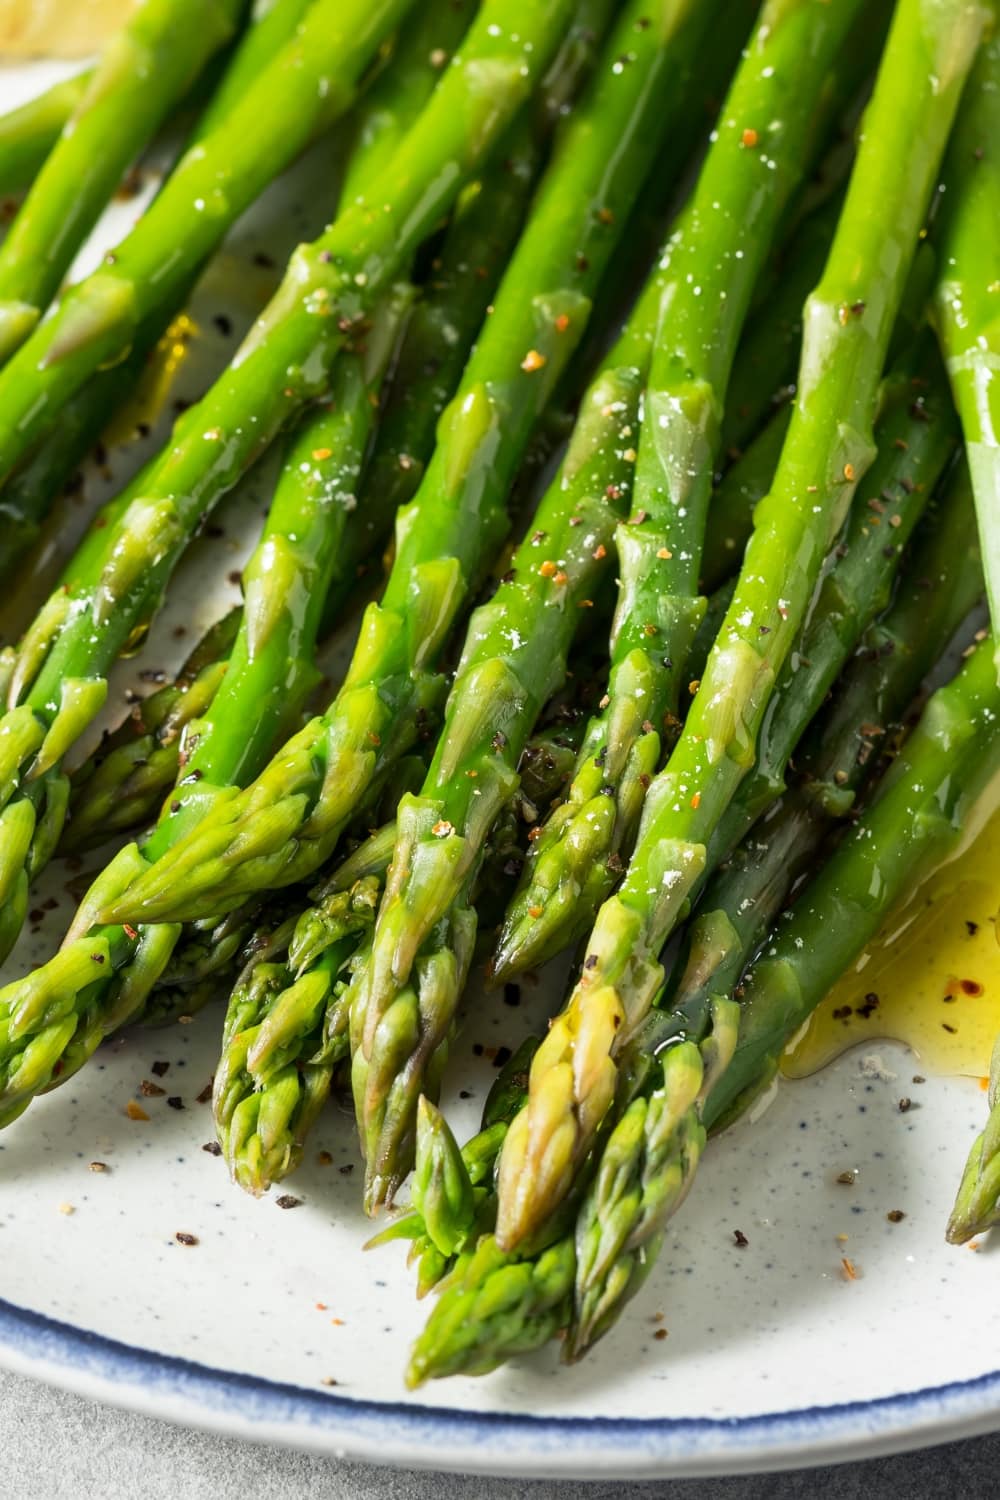 Oven-Baked Asparagus in Oil with Seasonings on a Plate